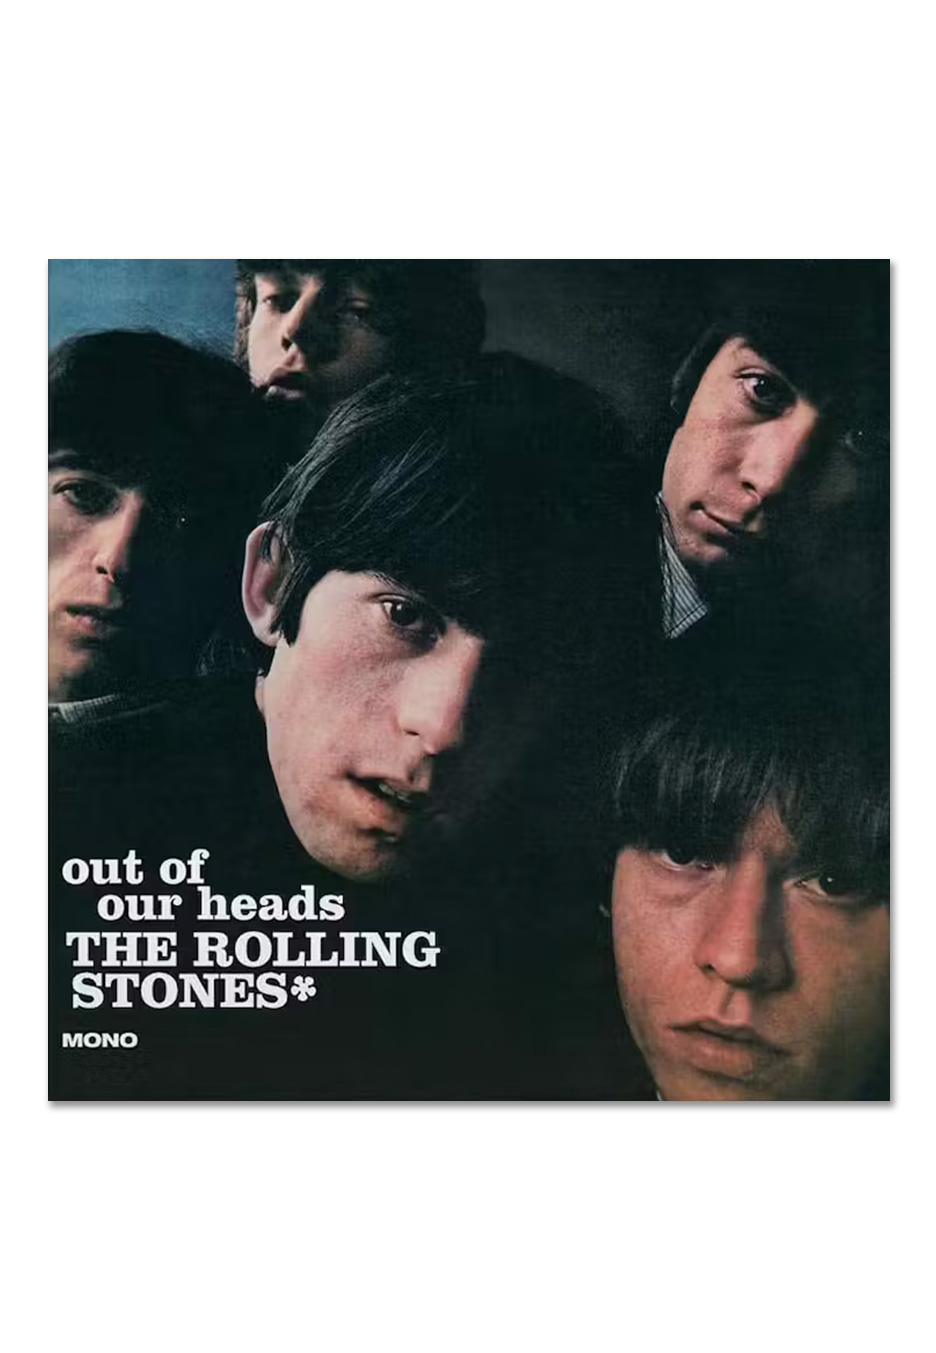 The Rolling Stones - Out Of Our Heads (US Version) - Vinyl